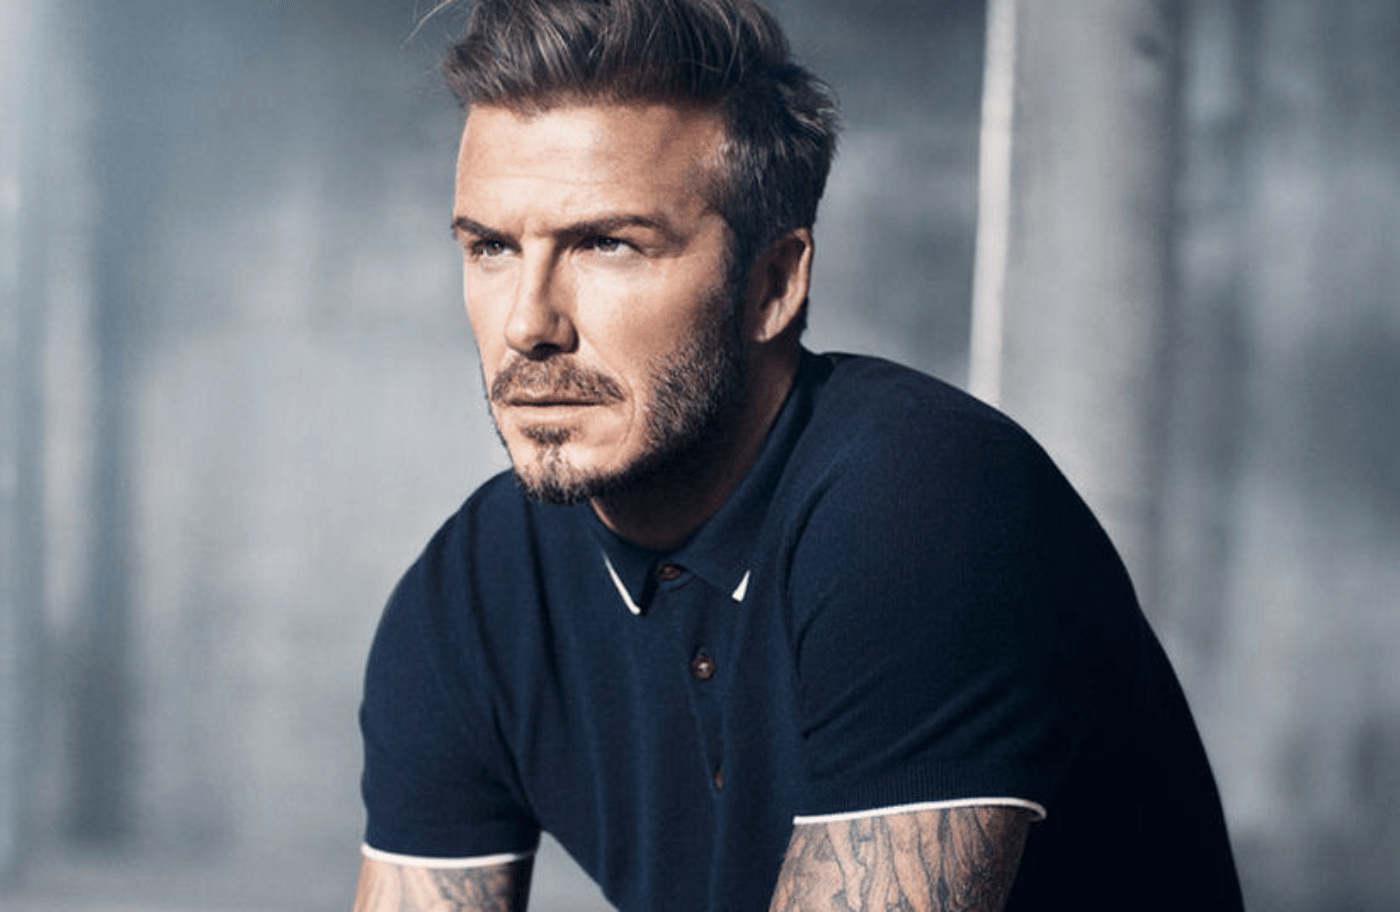 David Beckham Hairstyle - The Best Hairstyle Ideas Of All Times